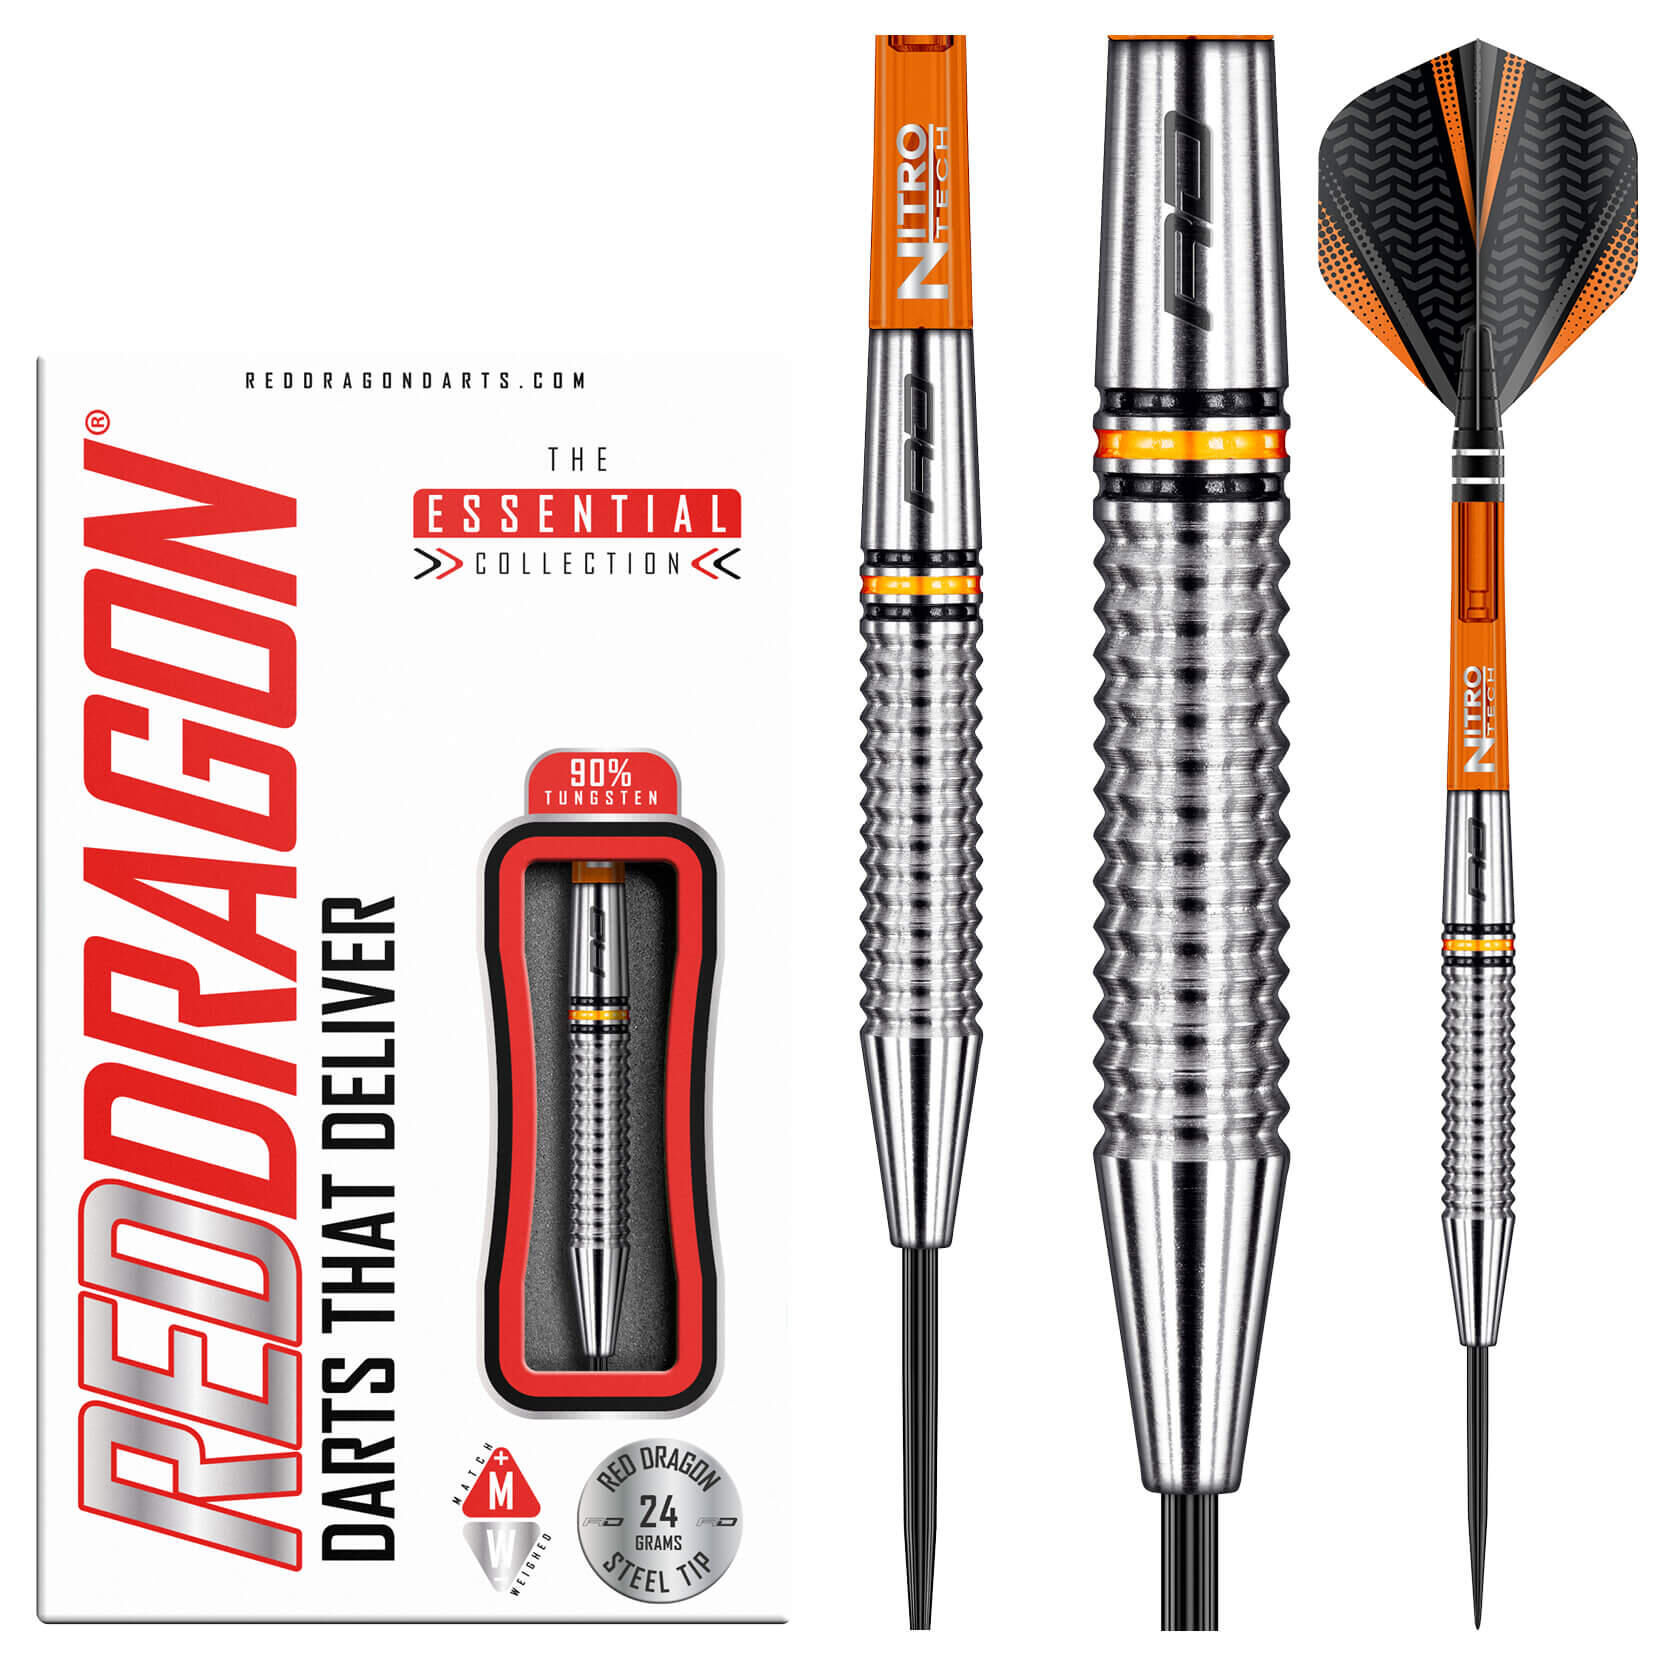 RED DRAGON DARTS Amberjack 17: 26g Tungsten Darts Set with Flights and Stems